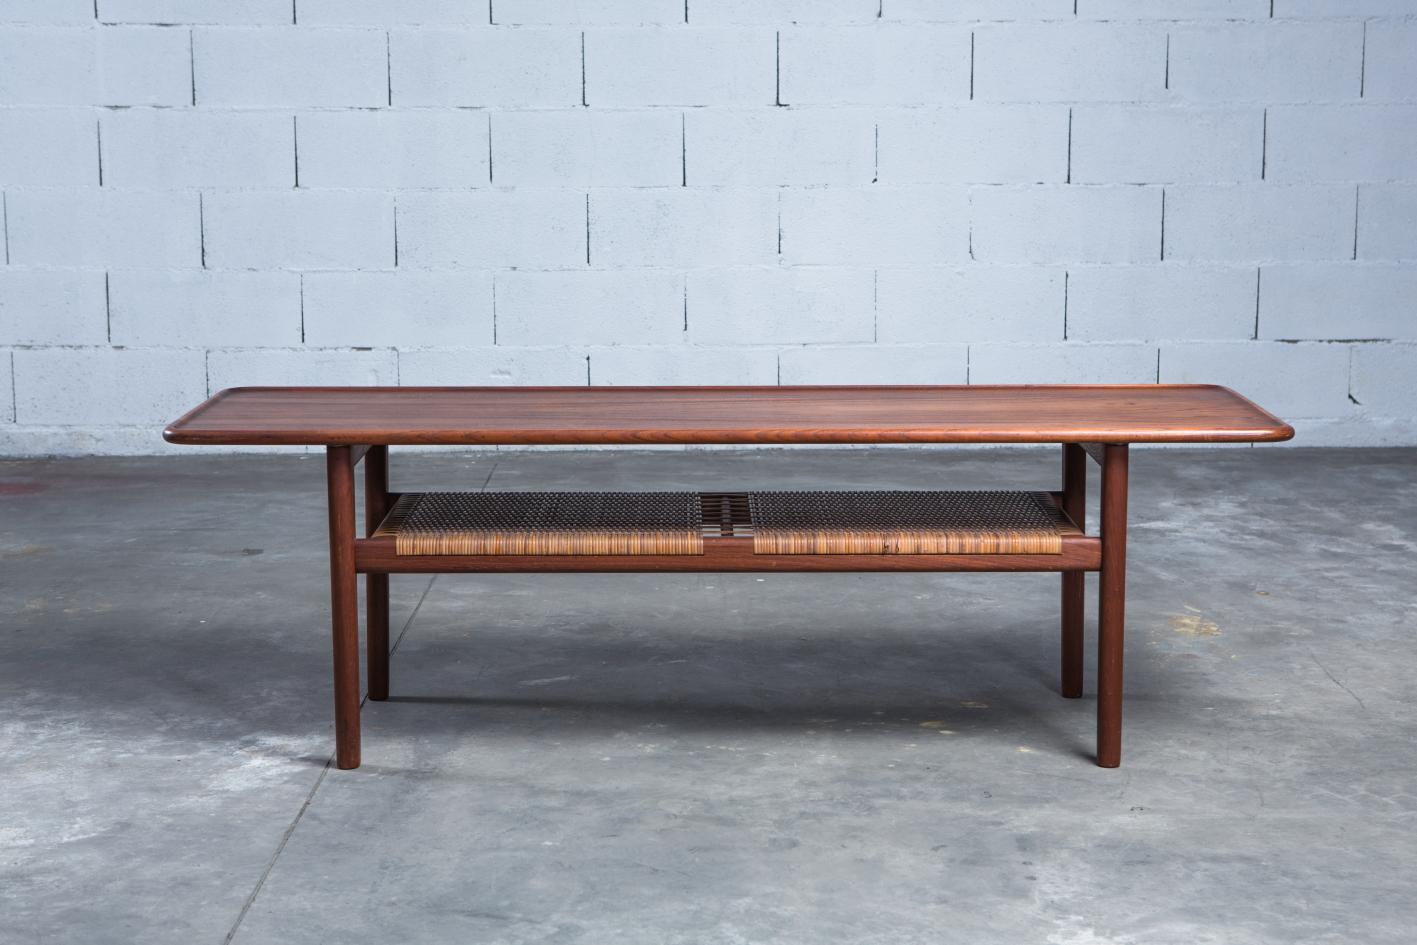 An elegant Danish coffee table model AT-10 in solid teak wood designed by Hans J. Wegner. Made by cabinetmaker Andreas Tuck, Odense - Denmark, in the late 1950s.  The table has beautiful details a teak structure and a shelf/magazine holder in